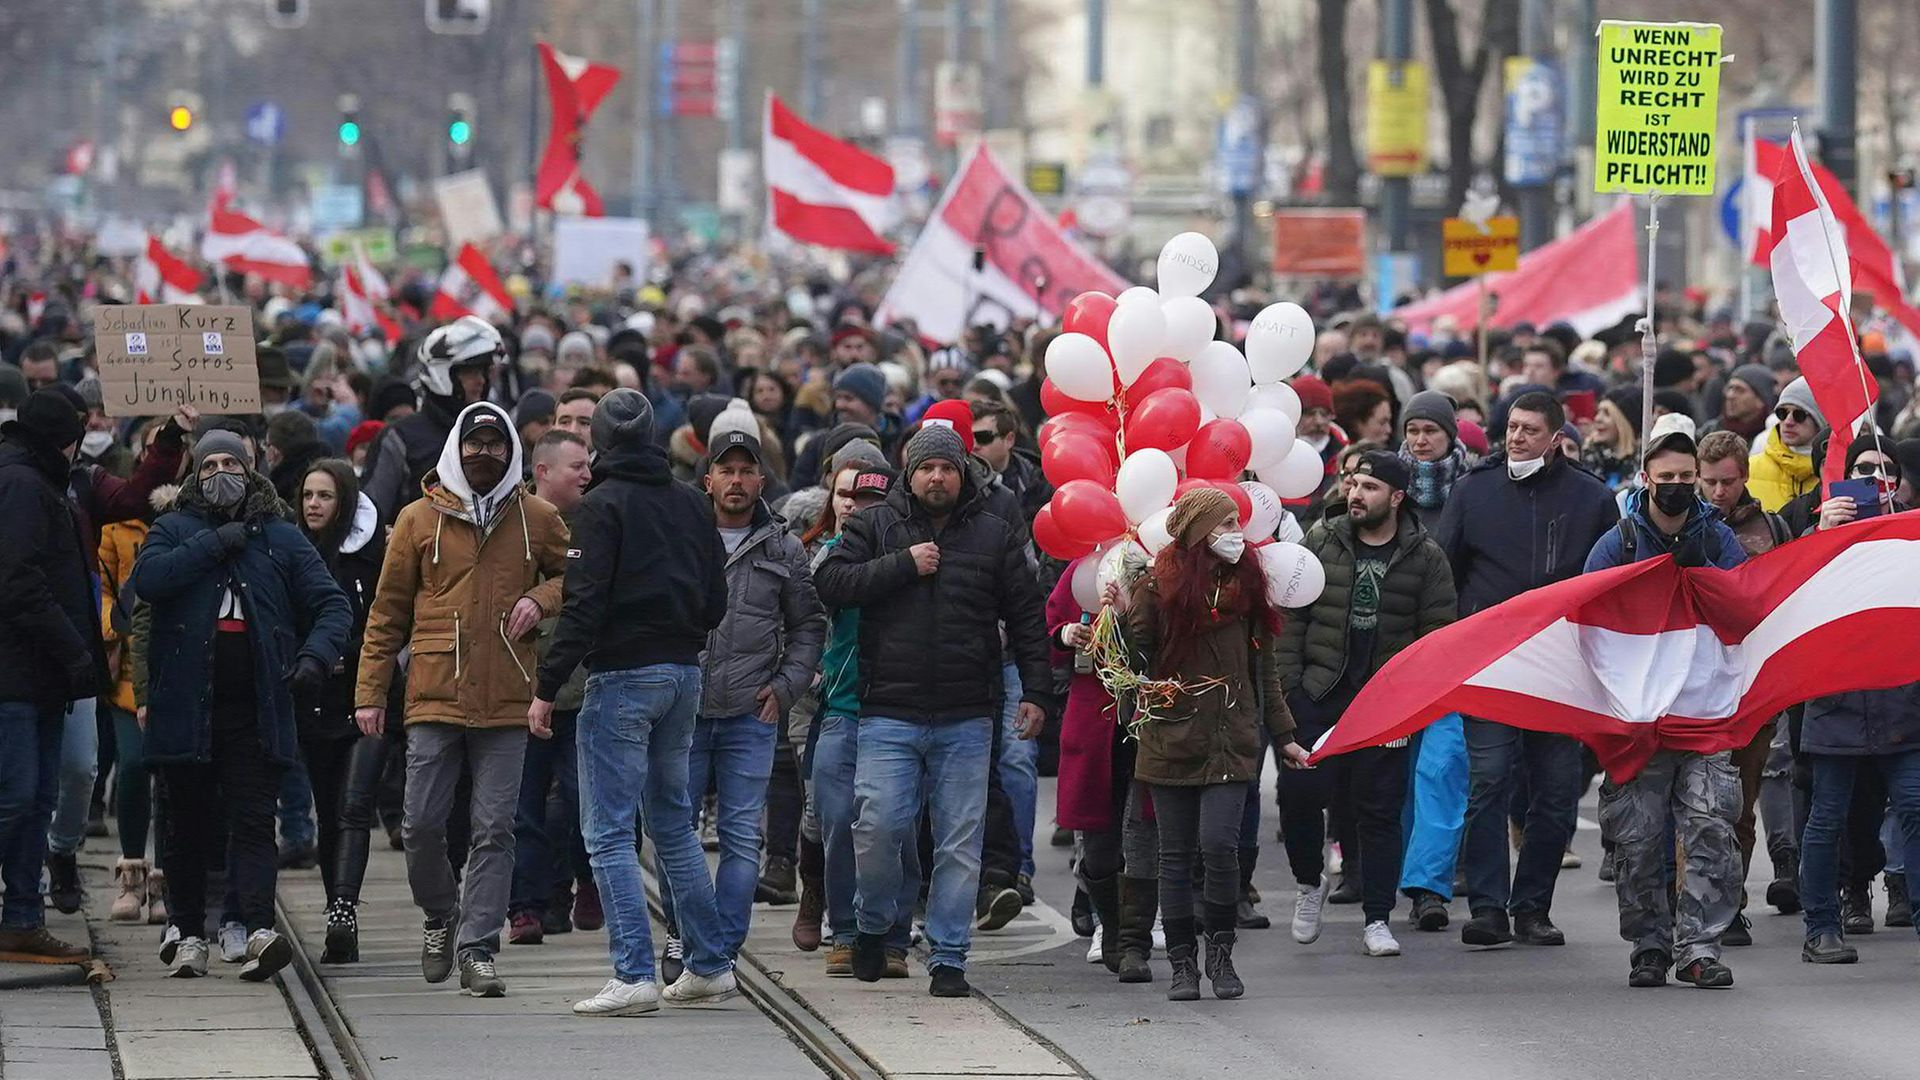 Protestors demonstrate against Covid restrictions in Vienna in January; the government has faced criticism over its handling of the pandemic, as well as a growing scandal involving a minister - Credit: APA/AFP via Getty Images